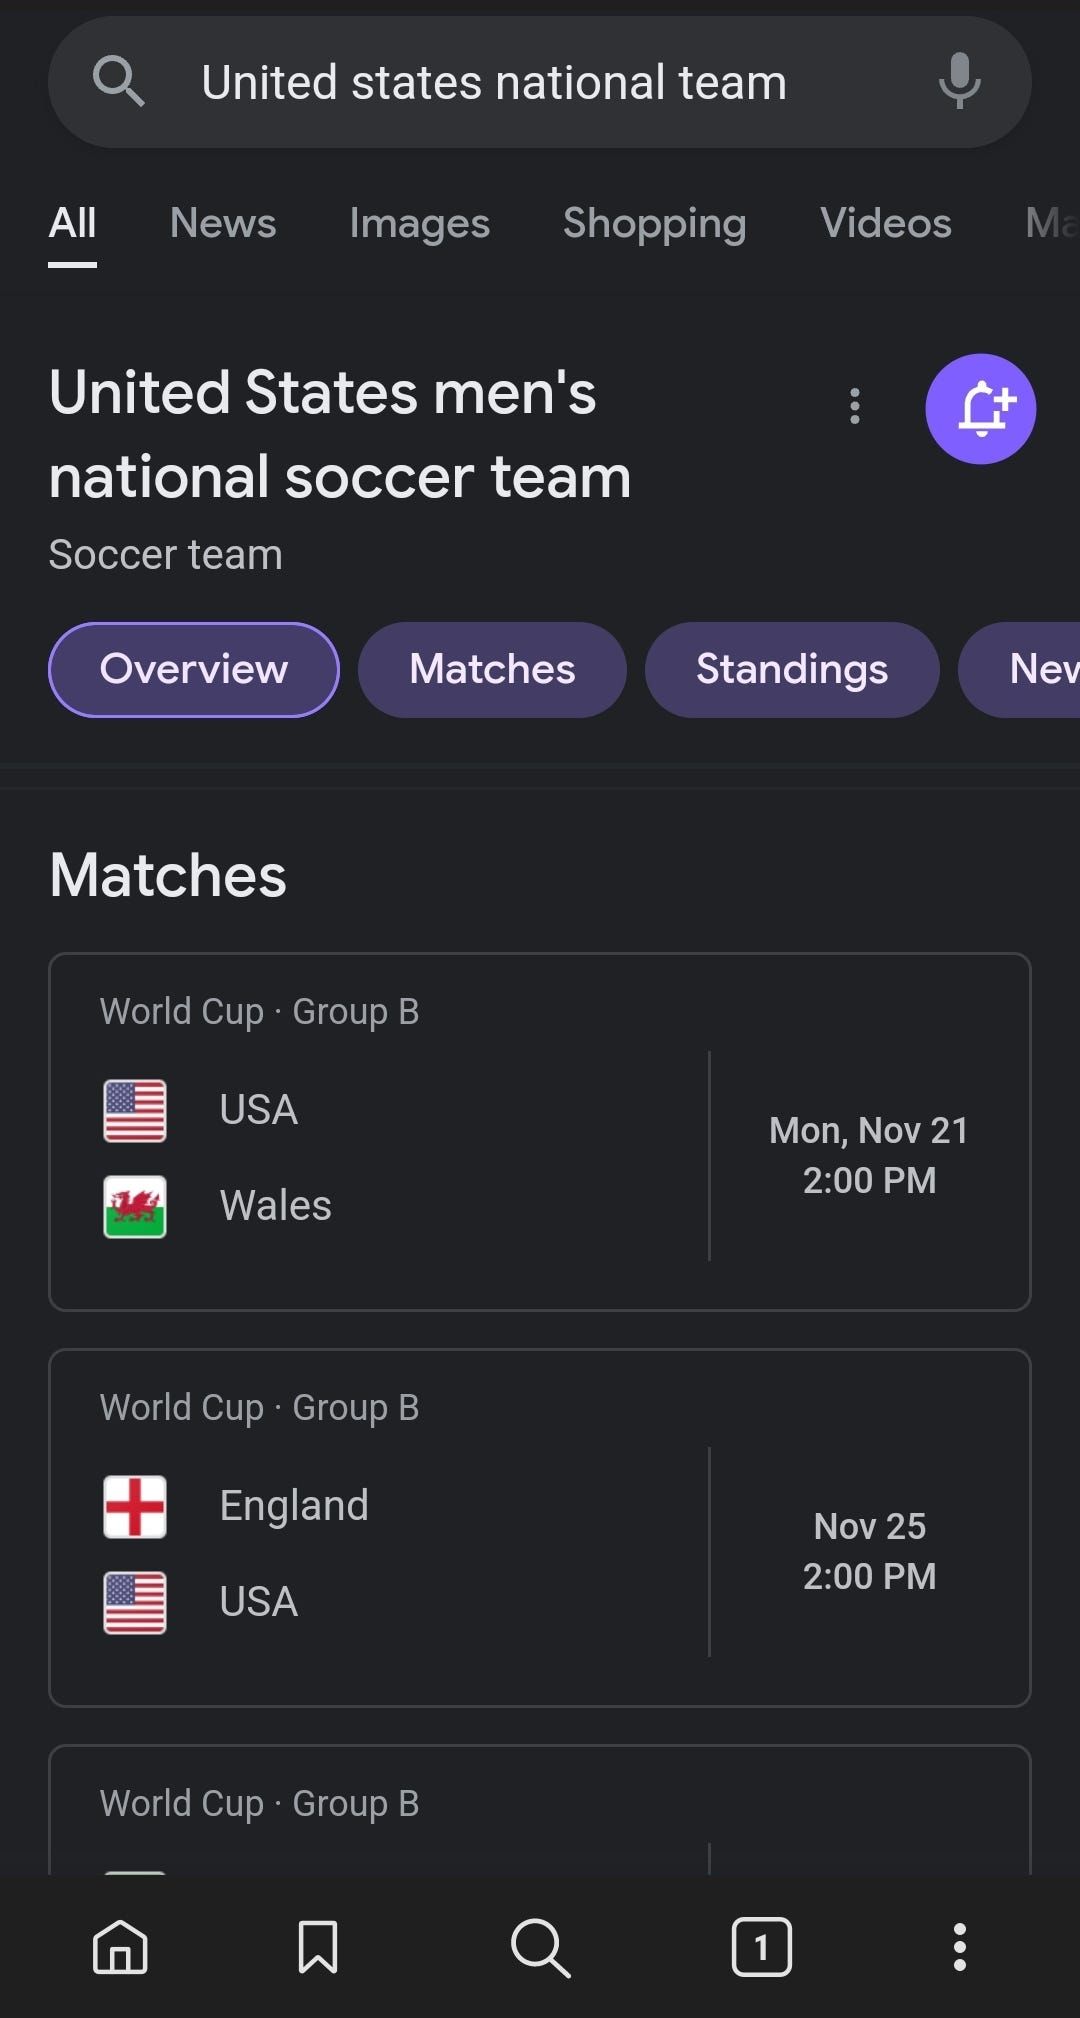 Google's search page for the US national soccer team